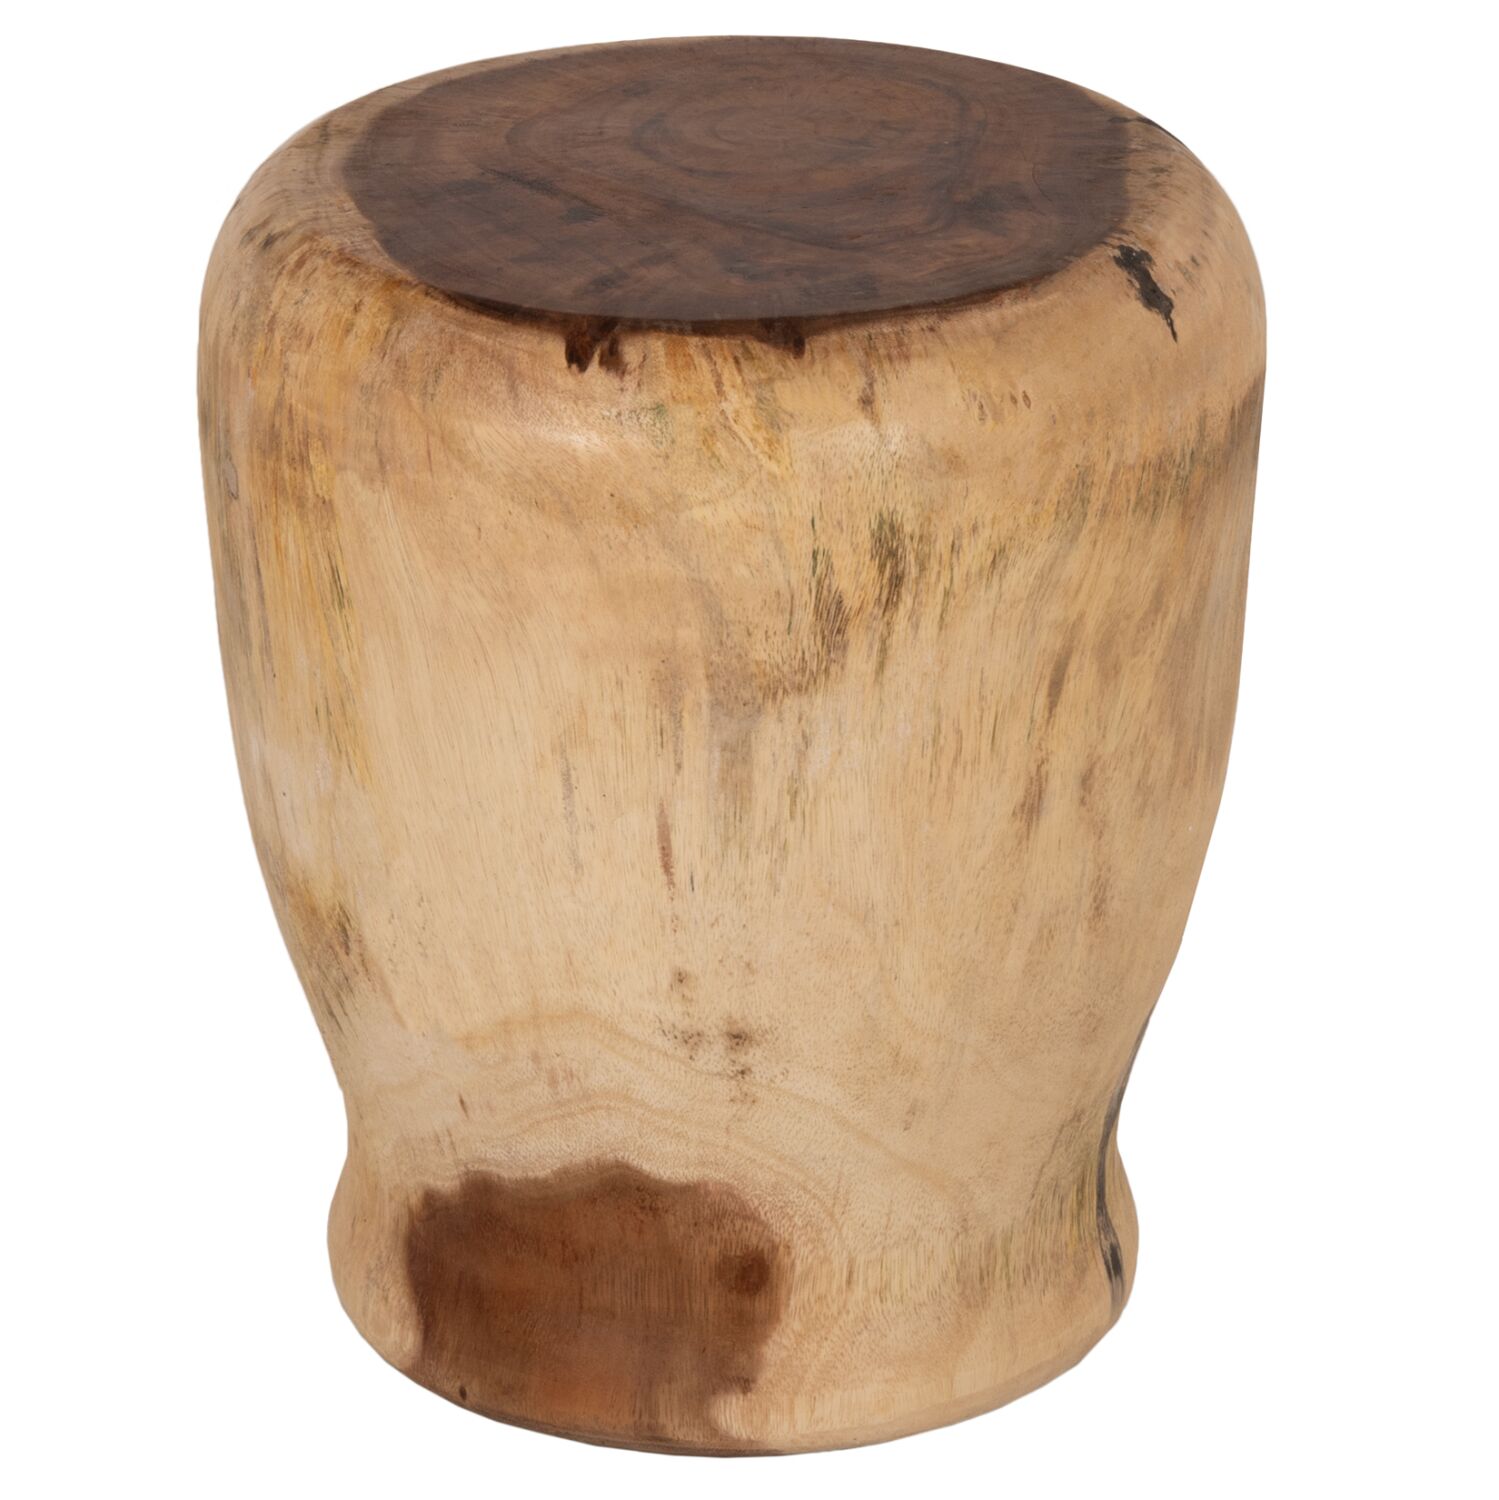 STOOL ROUND HM7897 SUAR WOOD IN NATURAL COLOR Φ40x45Hcm.